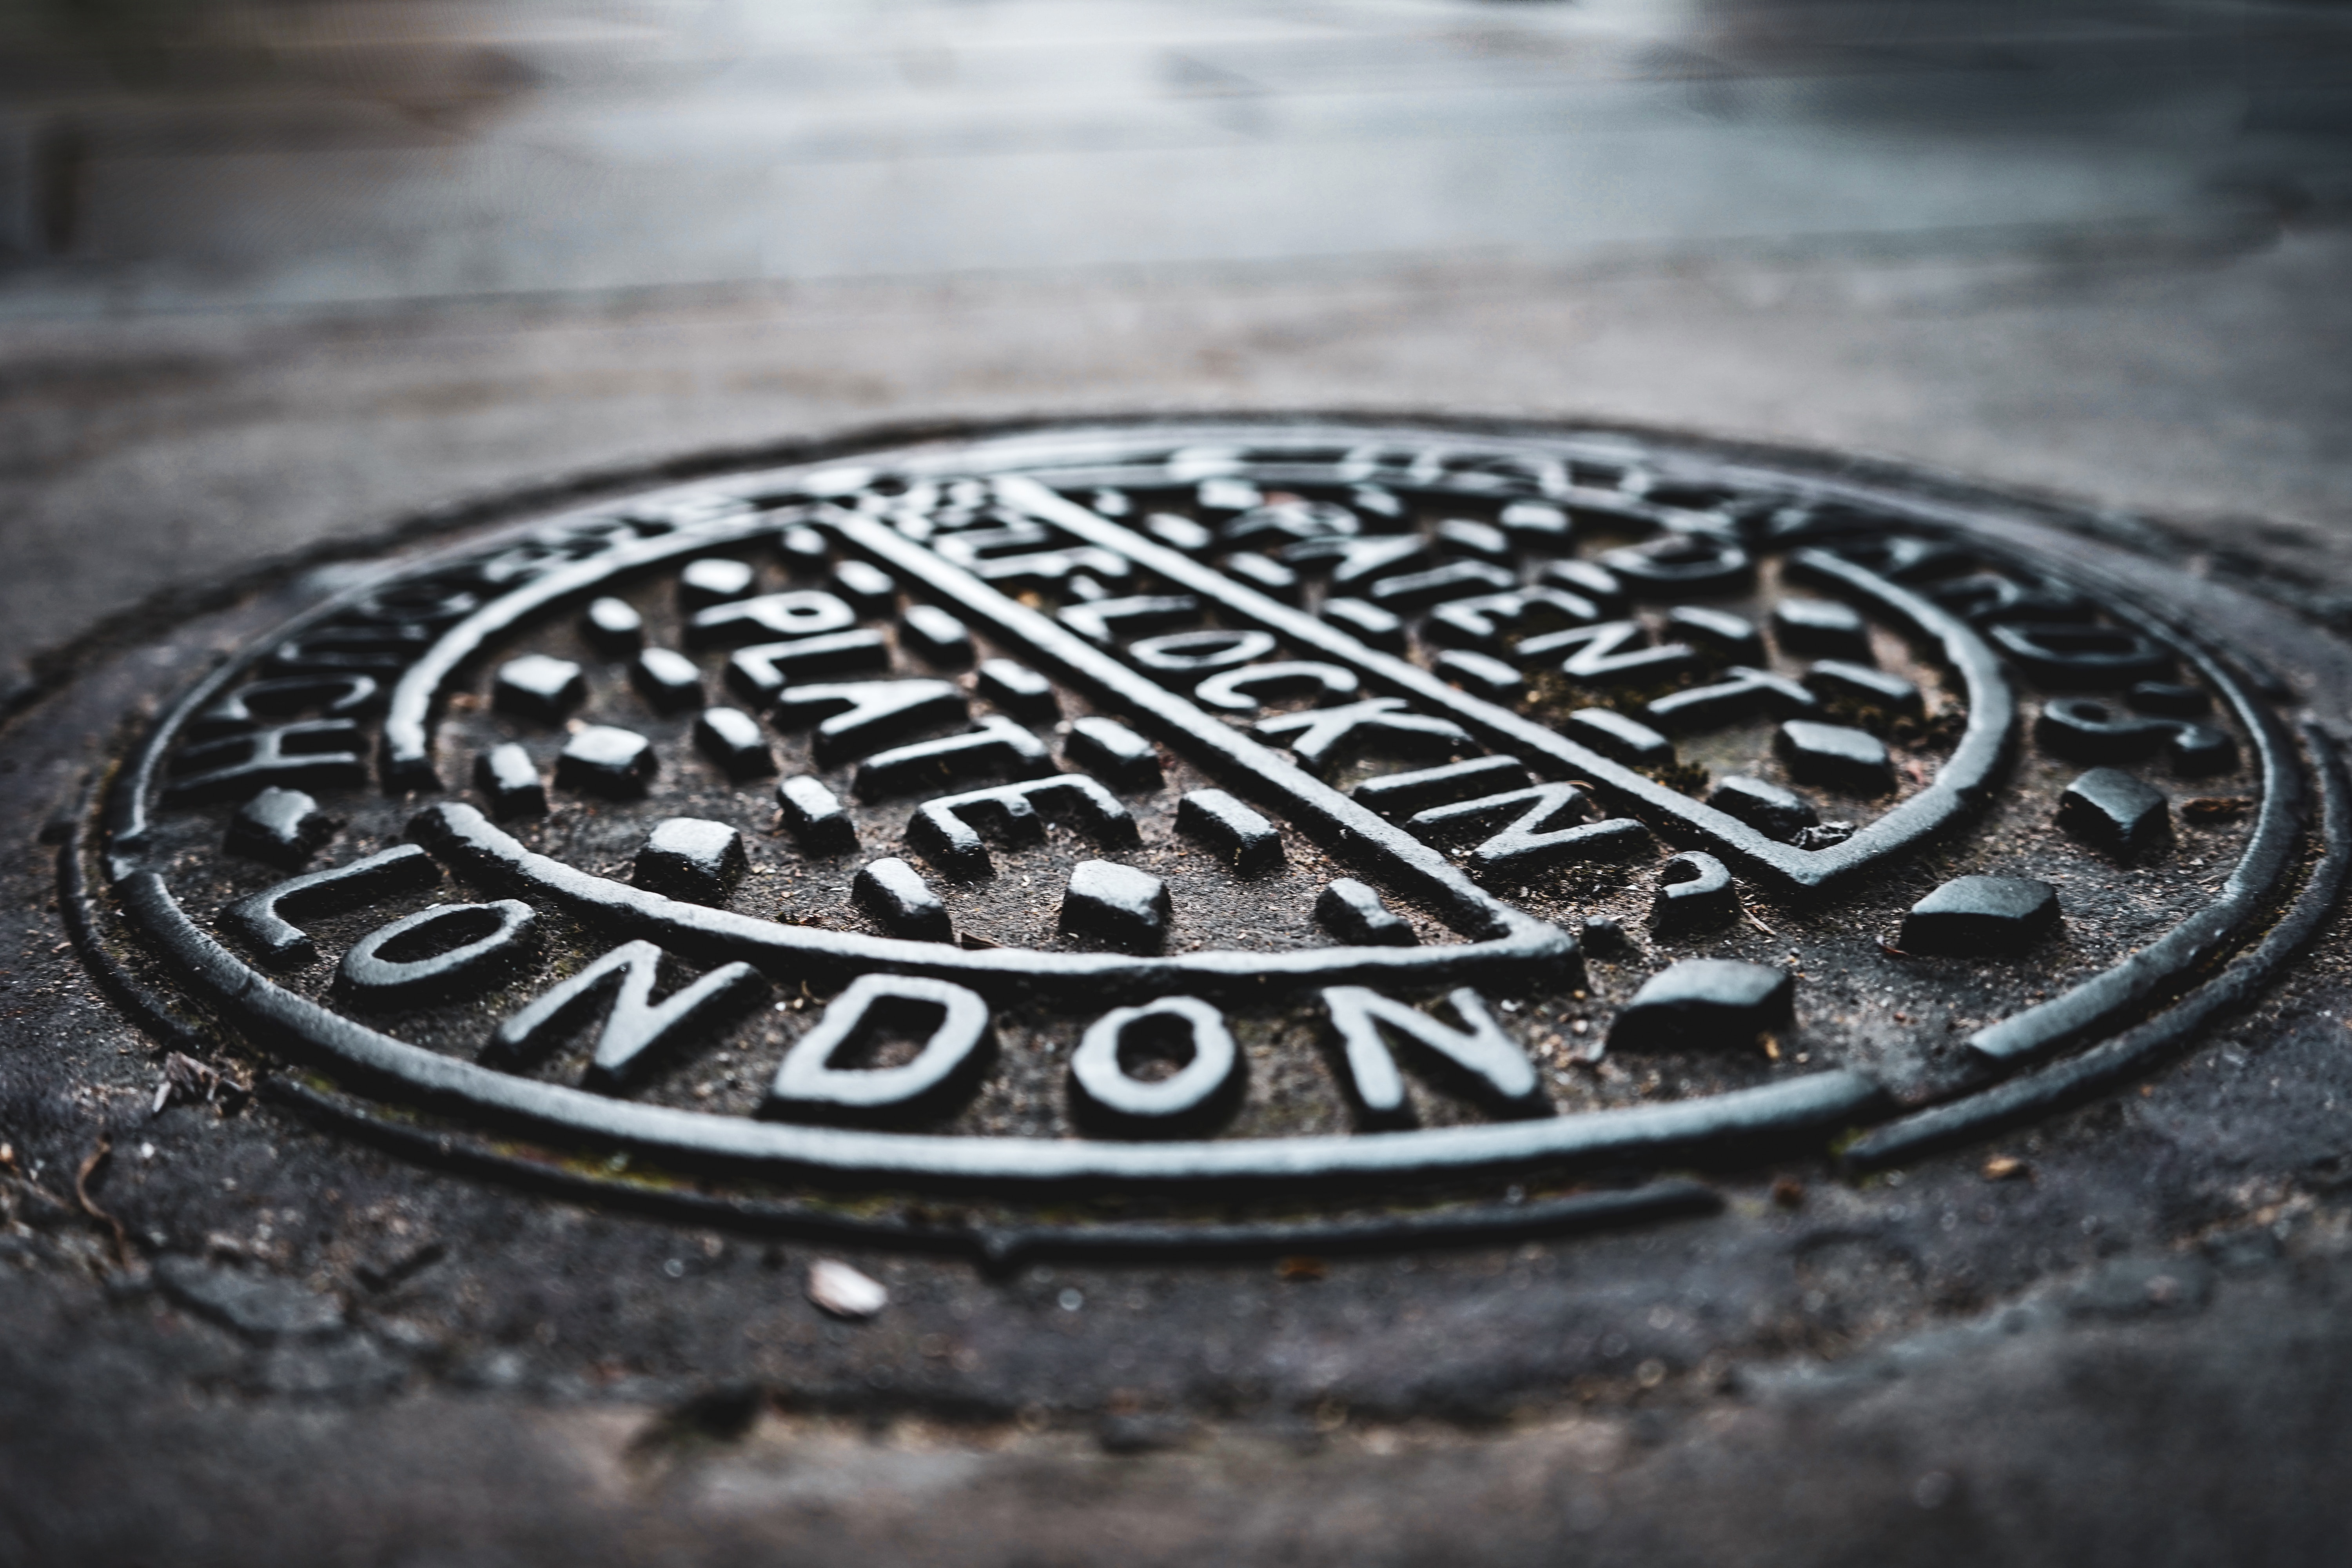 Manhole Cover of London Drains